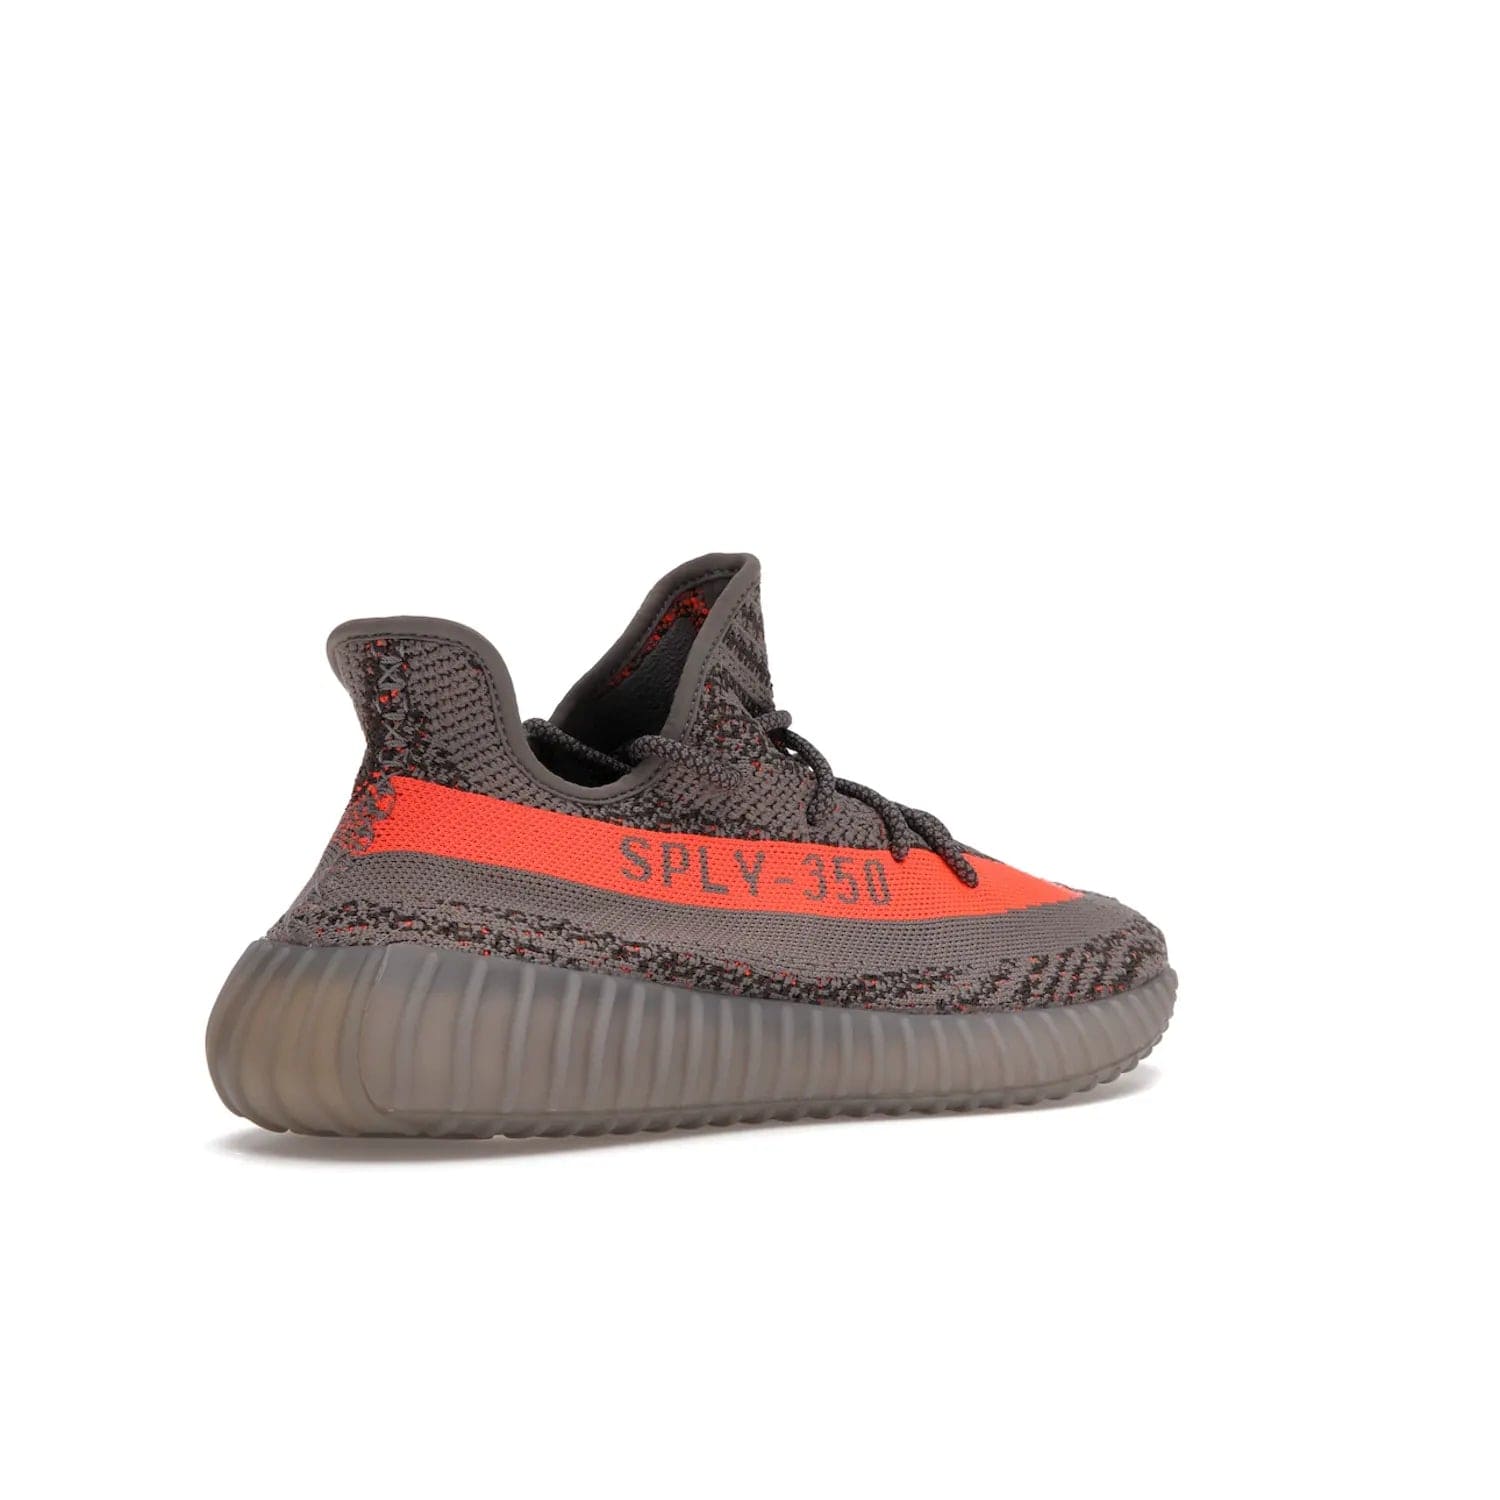 adidas Yeezy Boost 350 V2 Beluga Reflective - Image 33 - Only at www.BallersClubKickz.com - Shop the adidas Yeezy Boost 350 V2 Beluga Reflective: a stylish, reflective sneaker that stands out. Featuring Boost sole, Primeknit upper & signature orange stripe. Available Dec 2021.